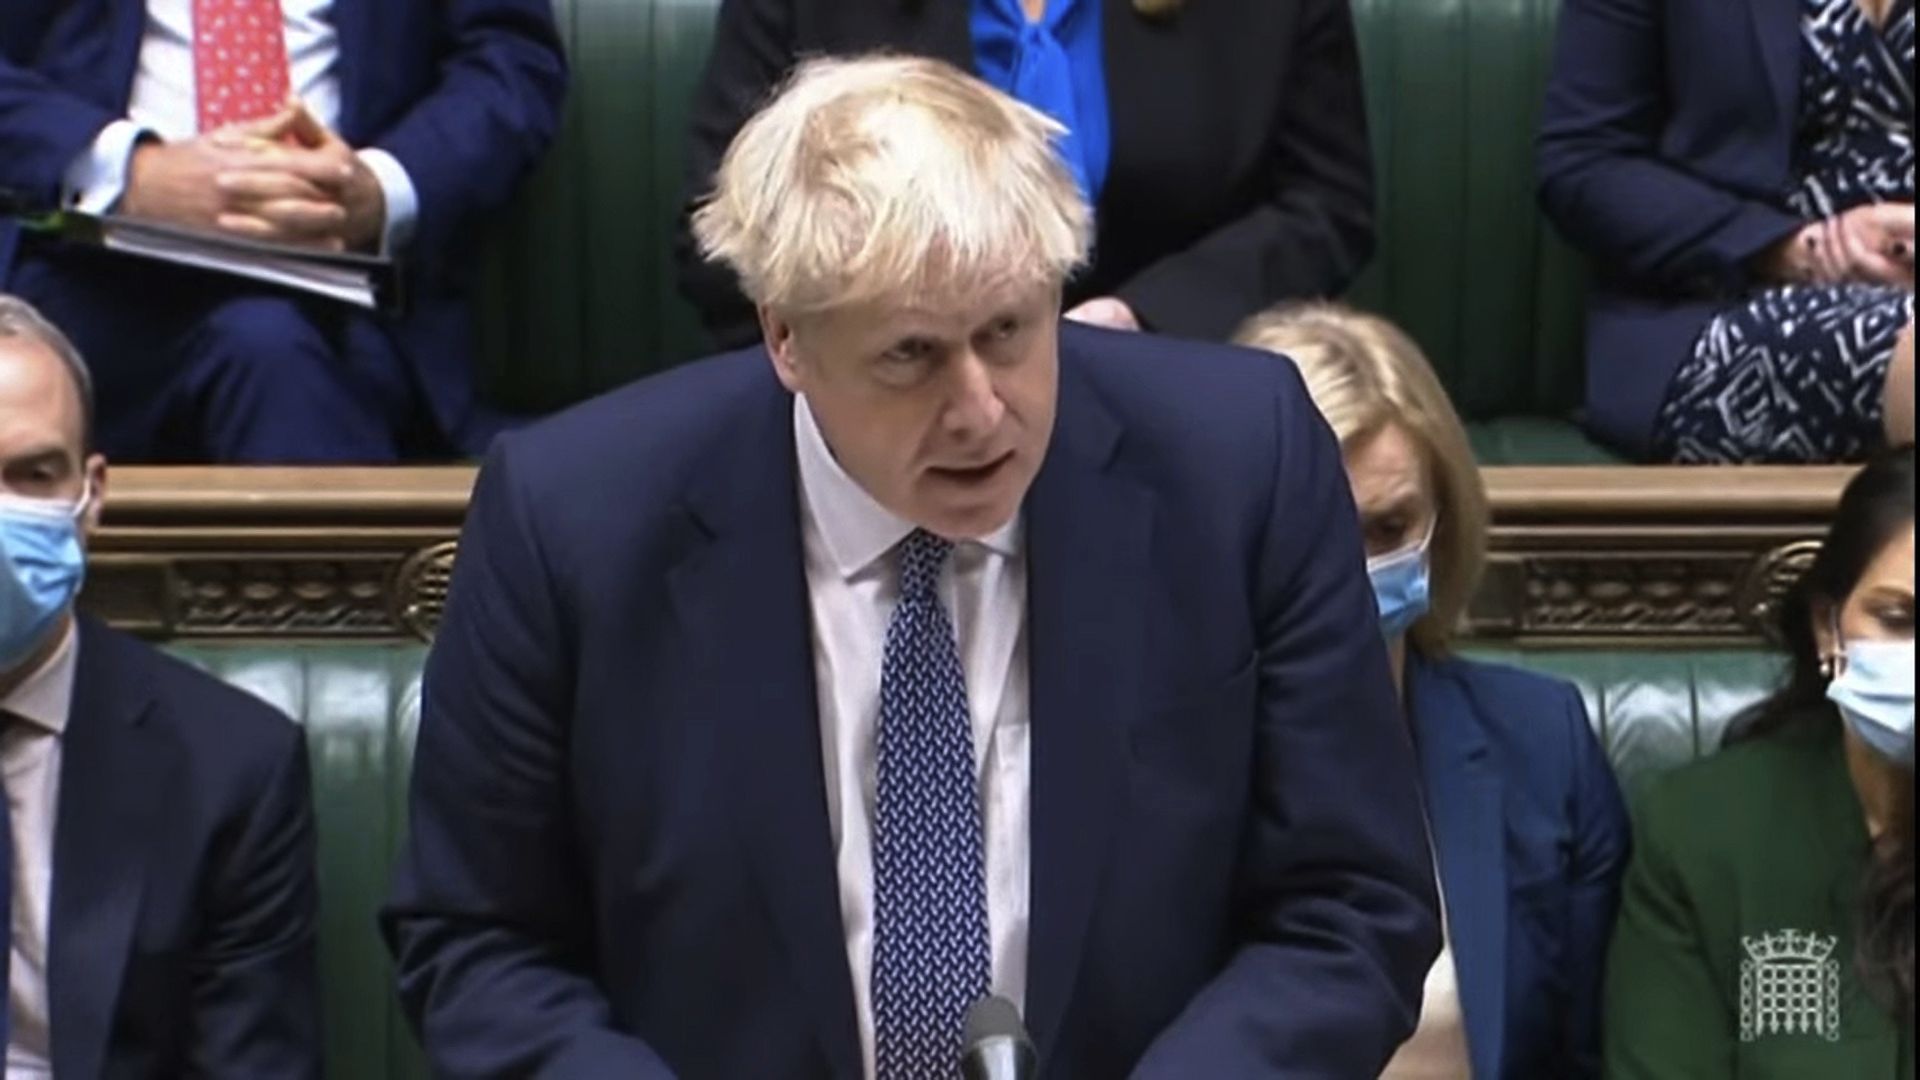 Prime Minister Boris Johnson makes a statement ahead of Prime Minister's Questions in the House of Commons